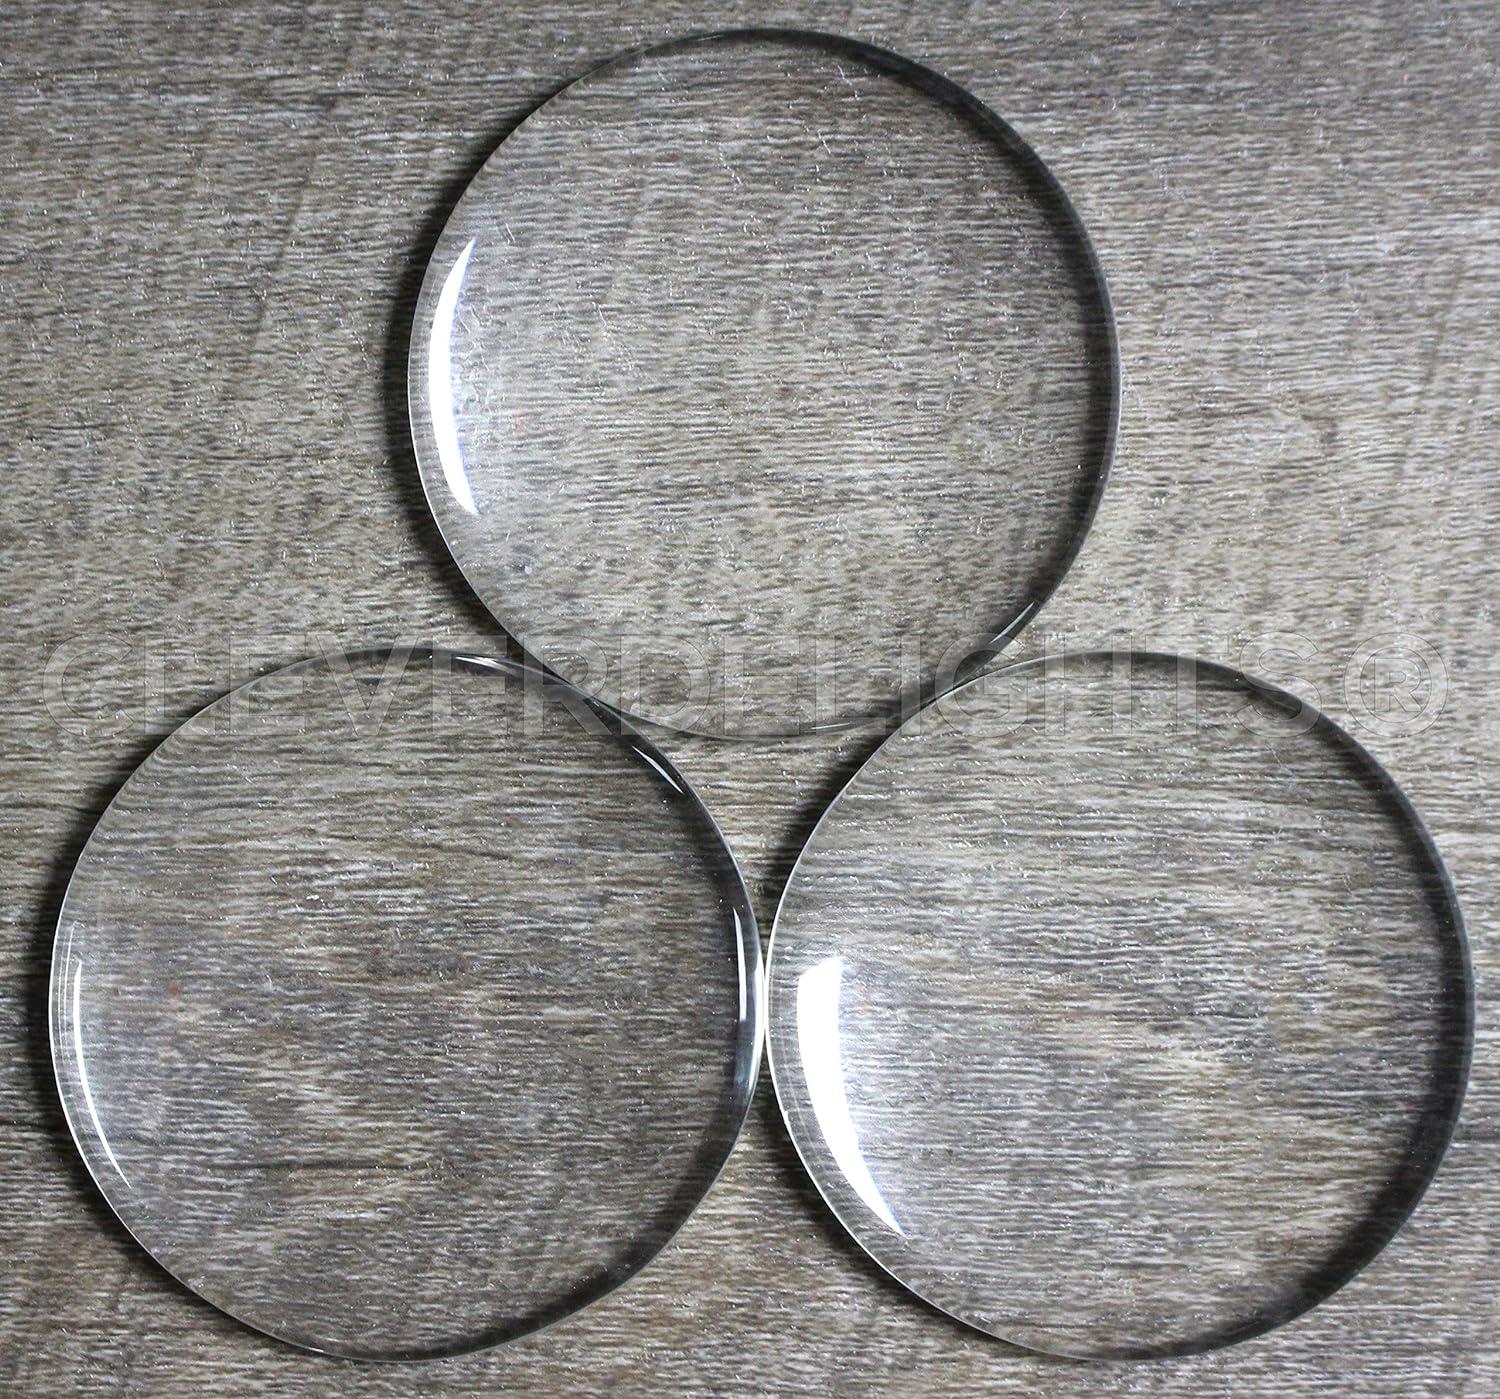 CleverDelights 2.5 Round Glass Cabochons - 5 Pack